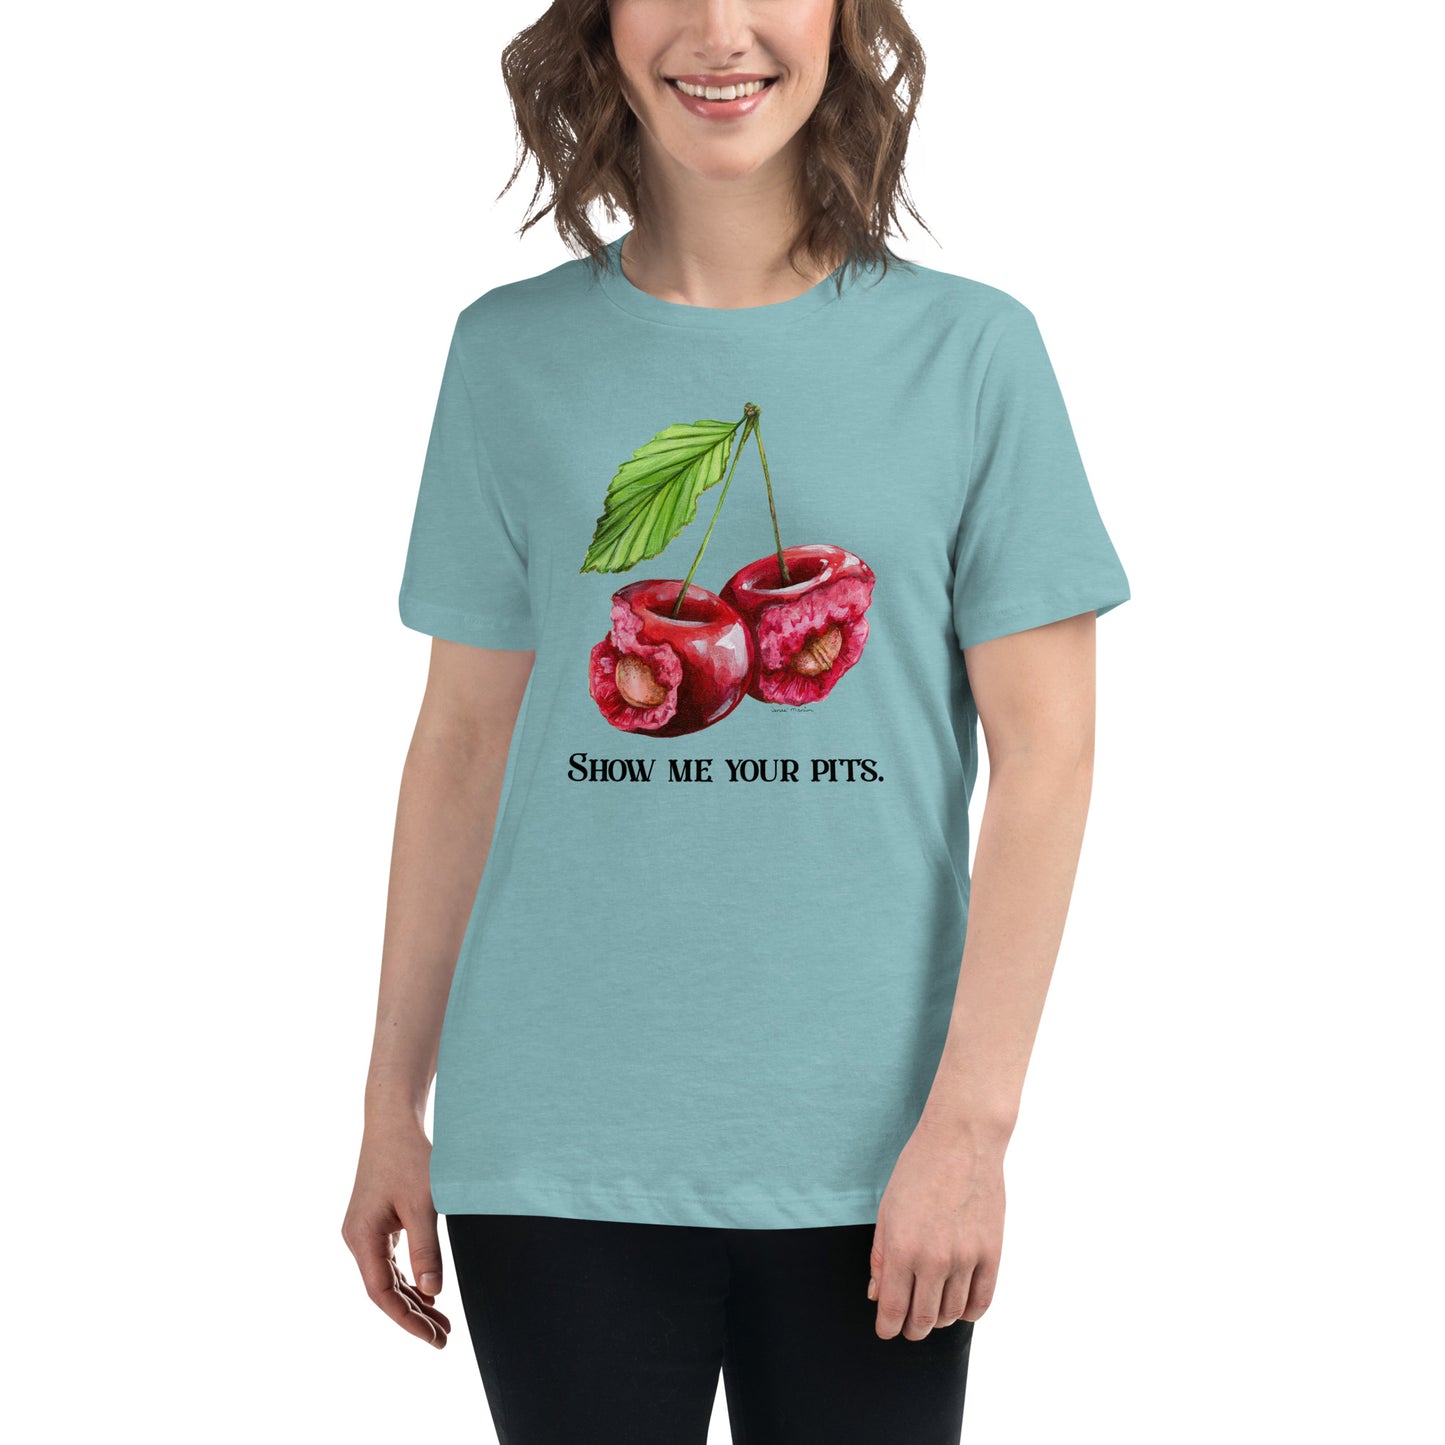 "Show me your pits." Manion Studios - Women's Relaxed T-Shirt.